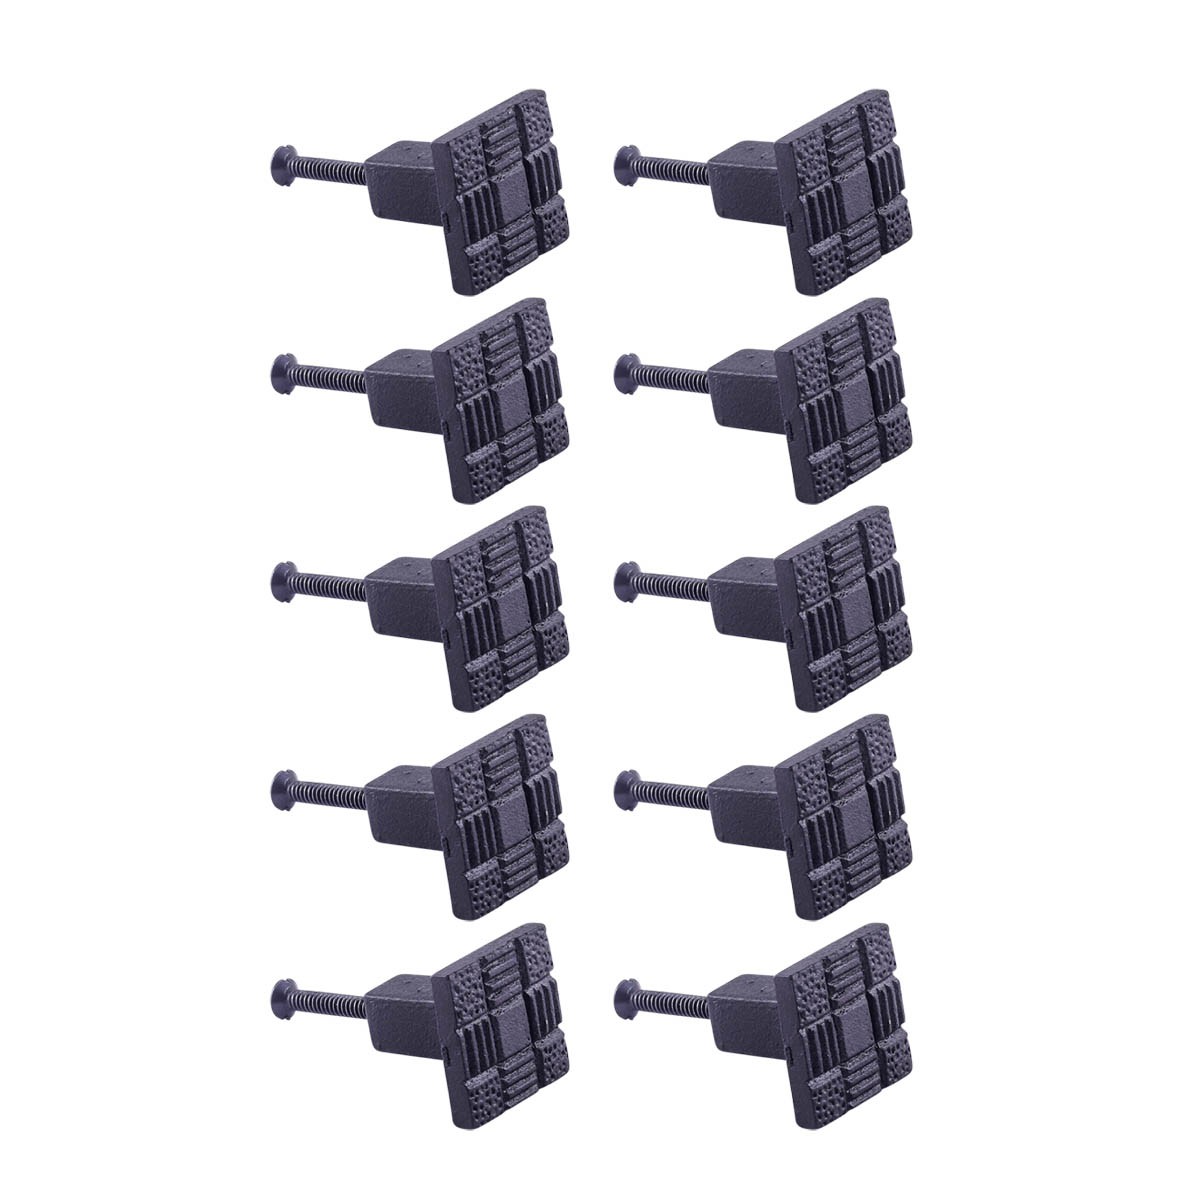 Renovators Supply Black Square Wrought Iron Cabinet Knob Pull Decorative Aztec Rust Resistant Vintage Metal Knobs for Kitchen Cabinet or Drawer Handles w/Screws Pack of 10 - image 1 of 8